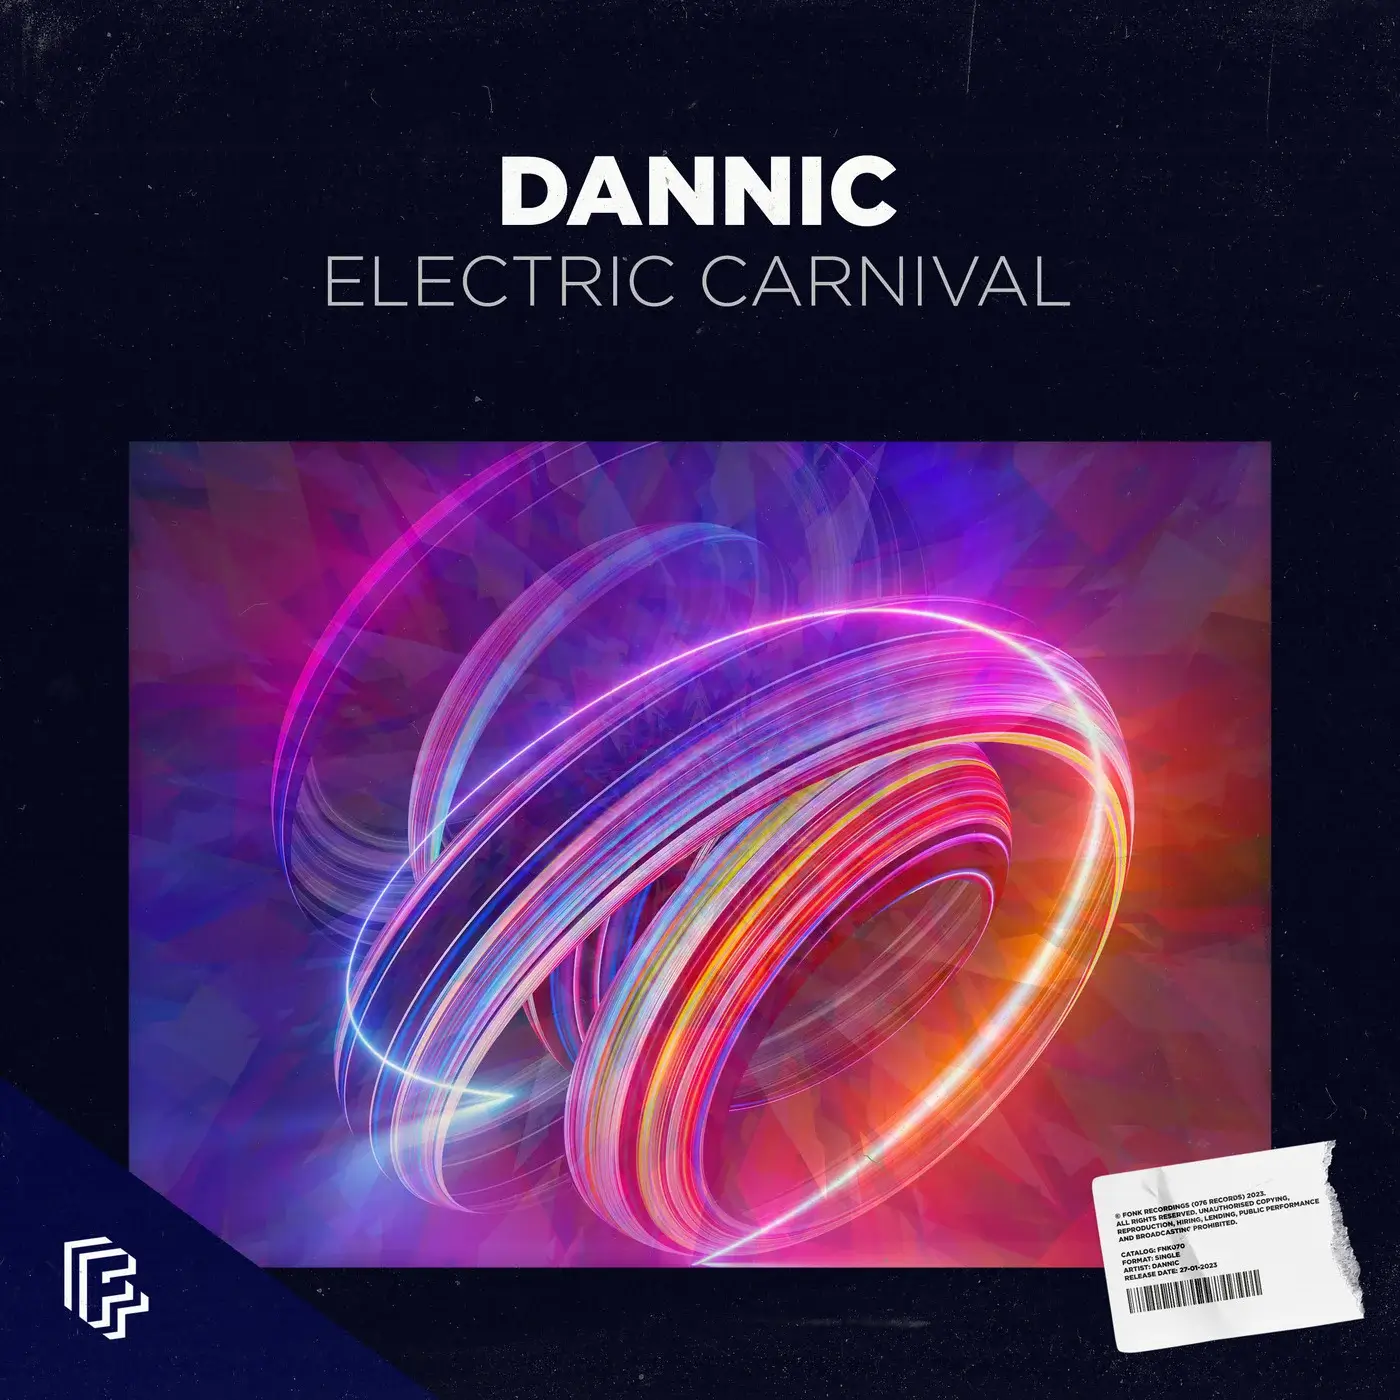 Dannic kicks off the year with “Electric Carnival”